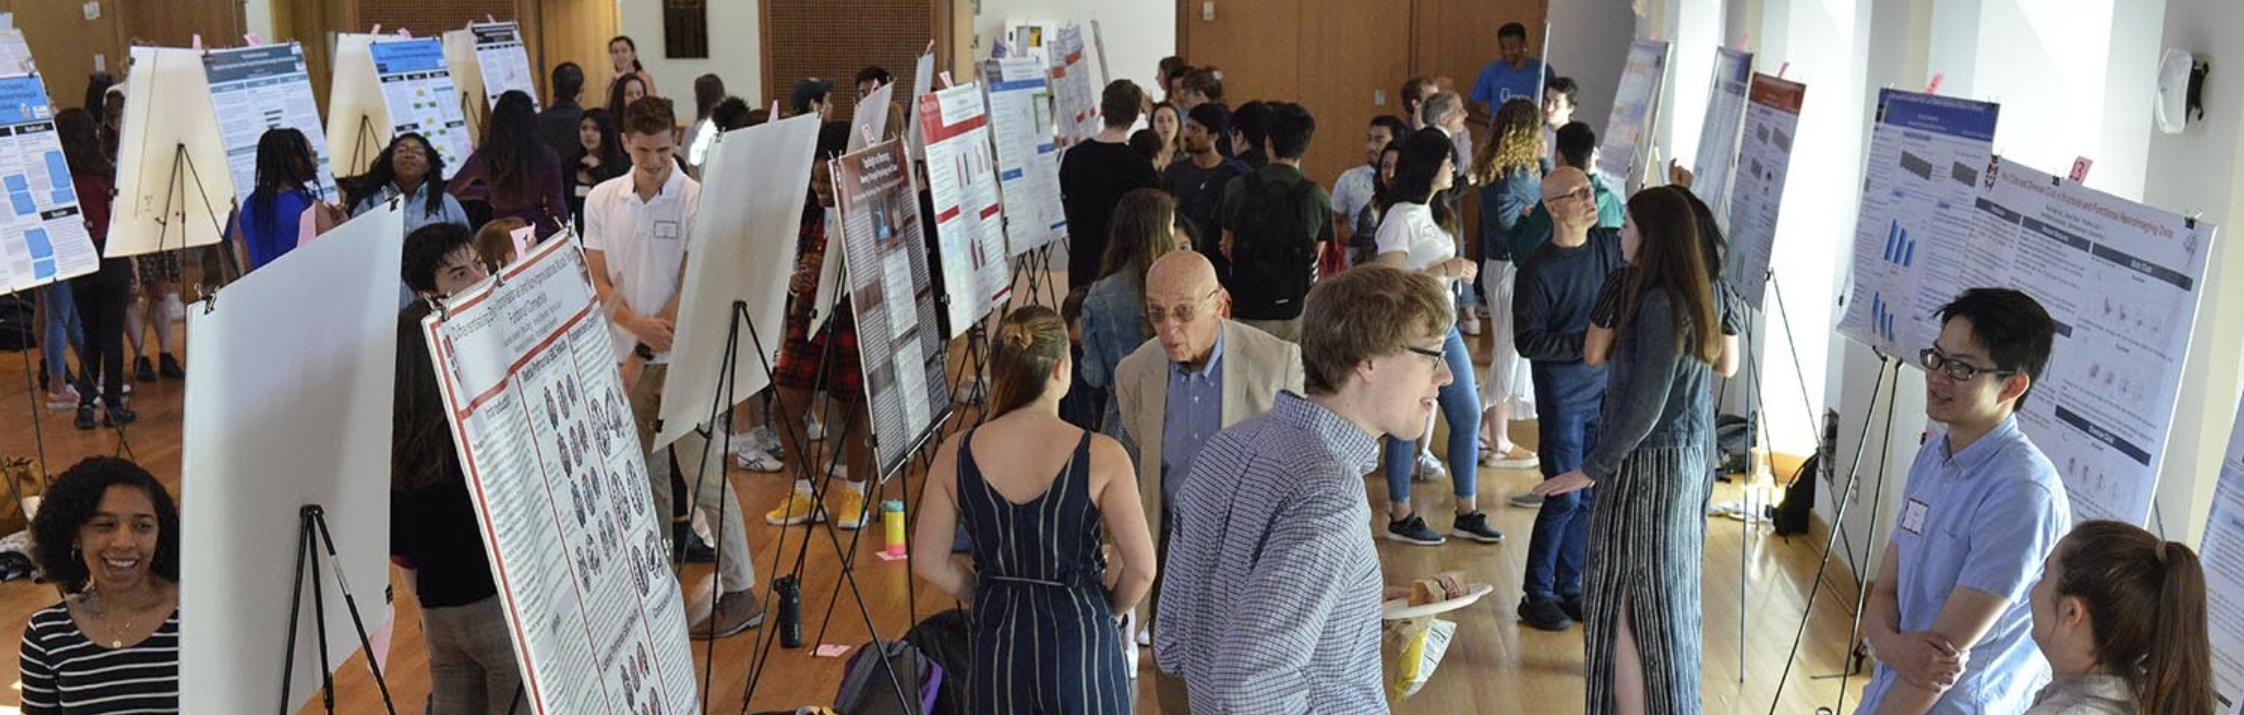 Psychology Department Research Poster Session